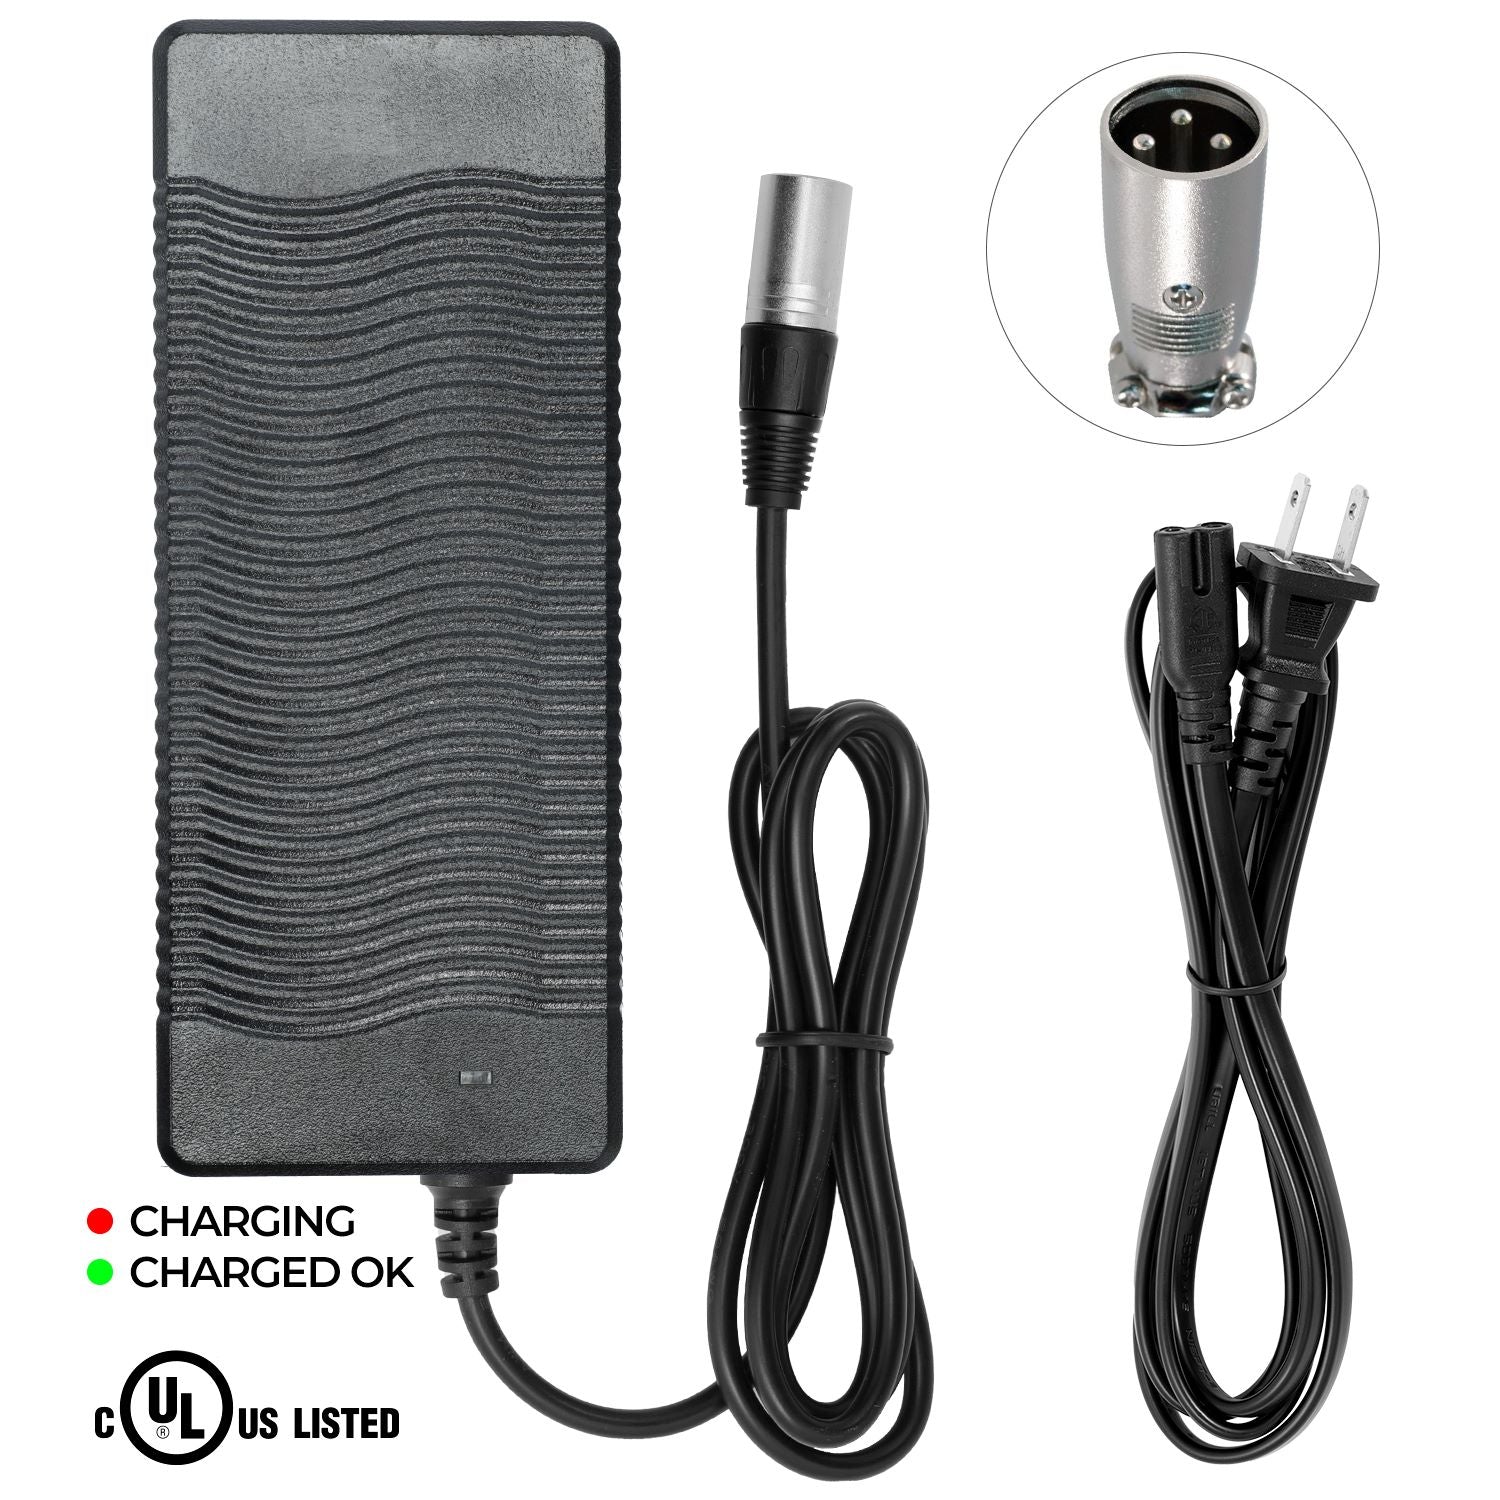 Rad Power eBike Charger